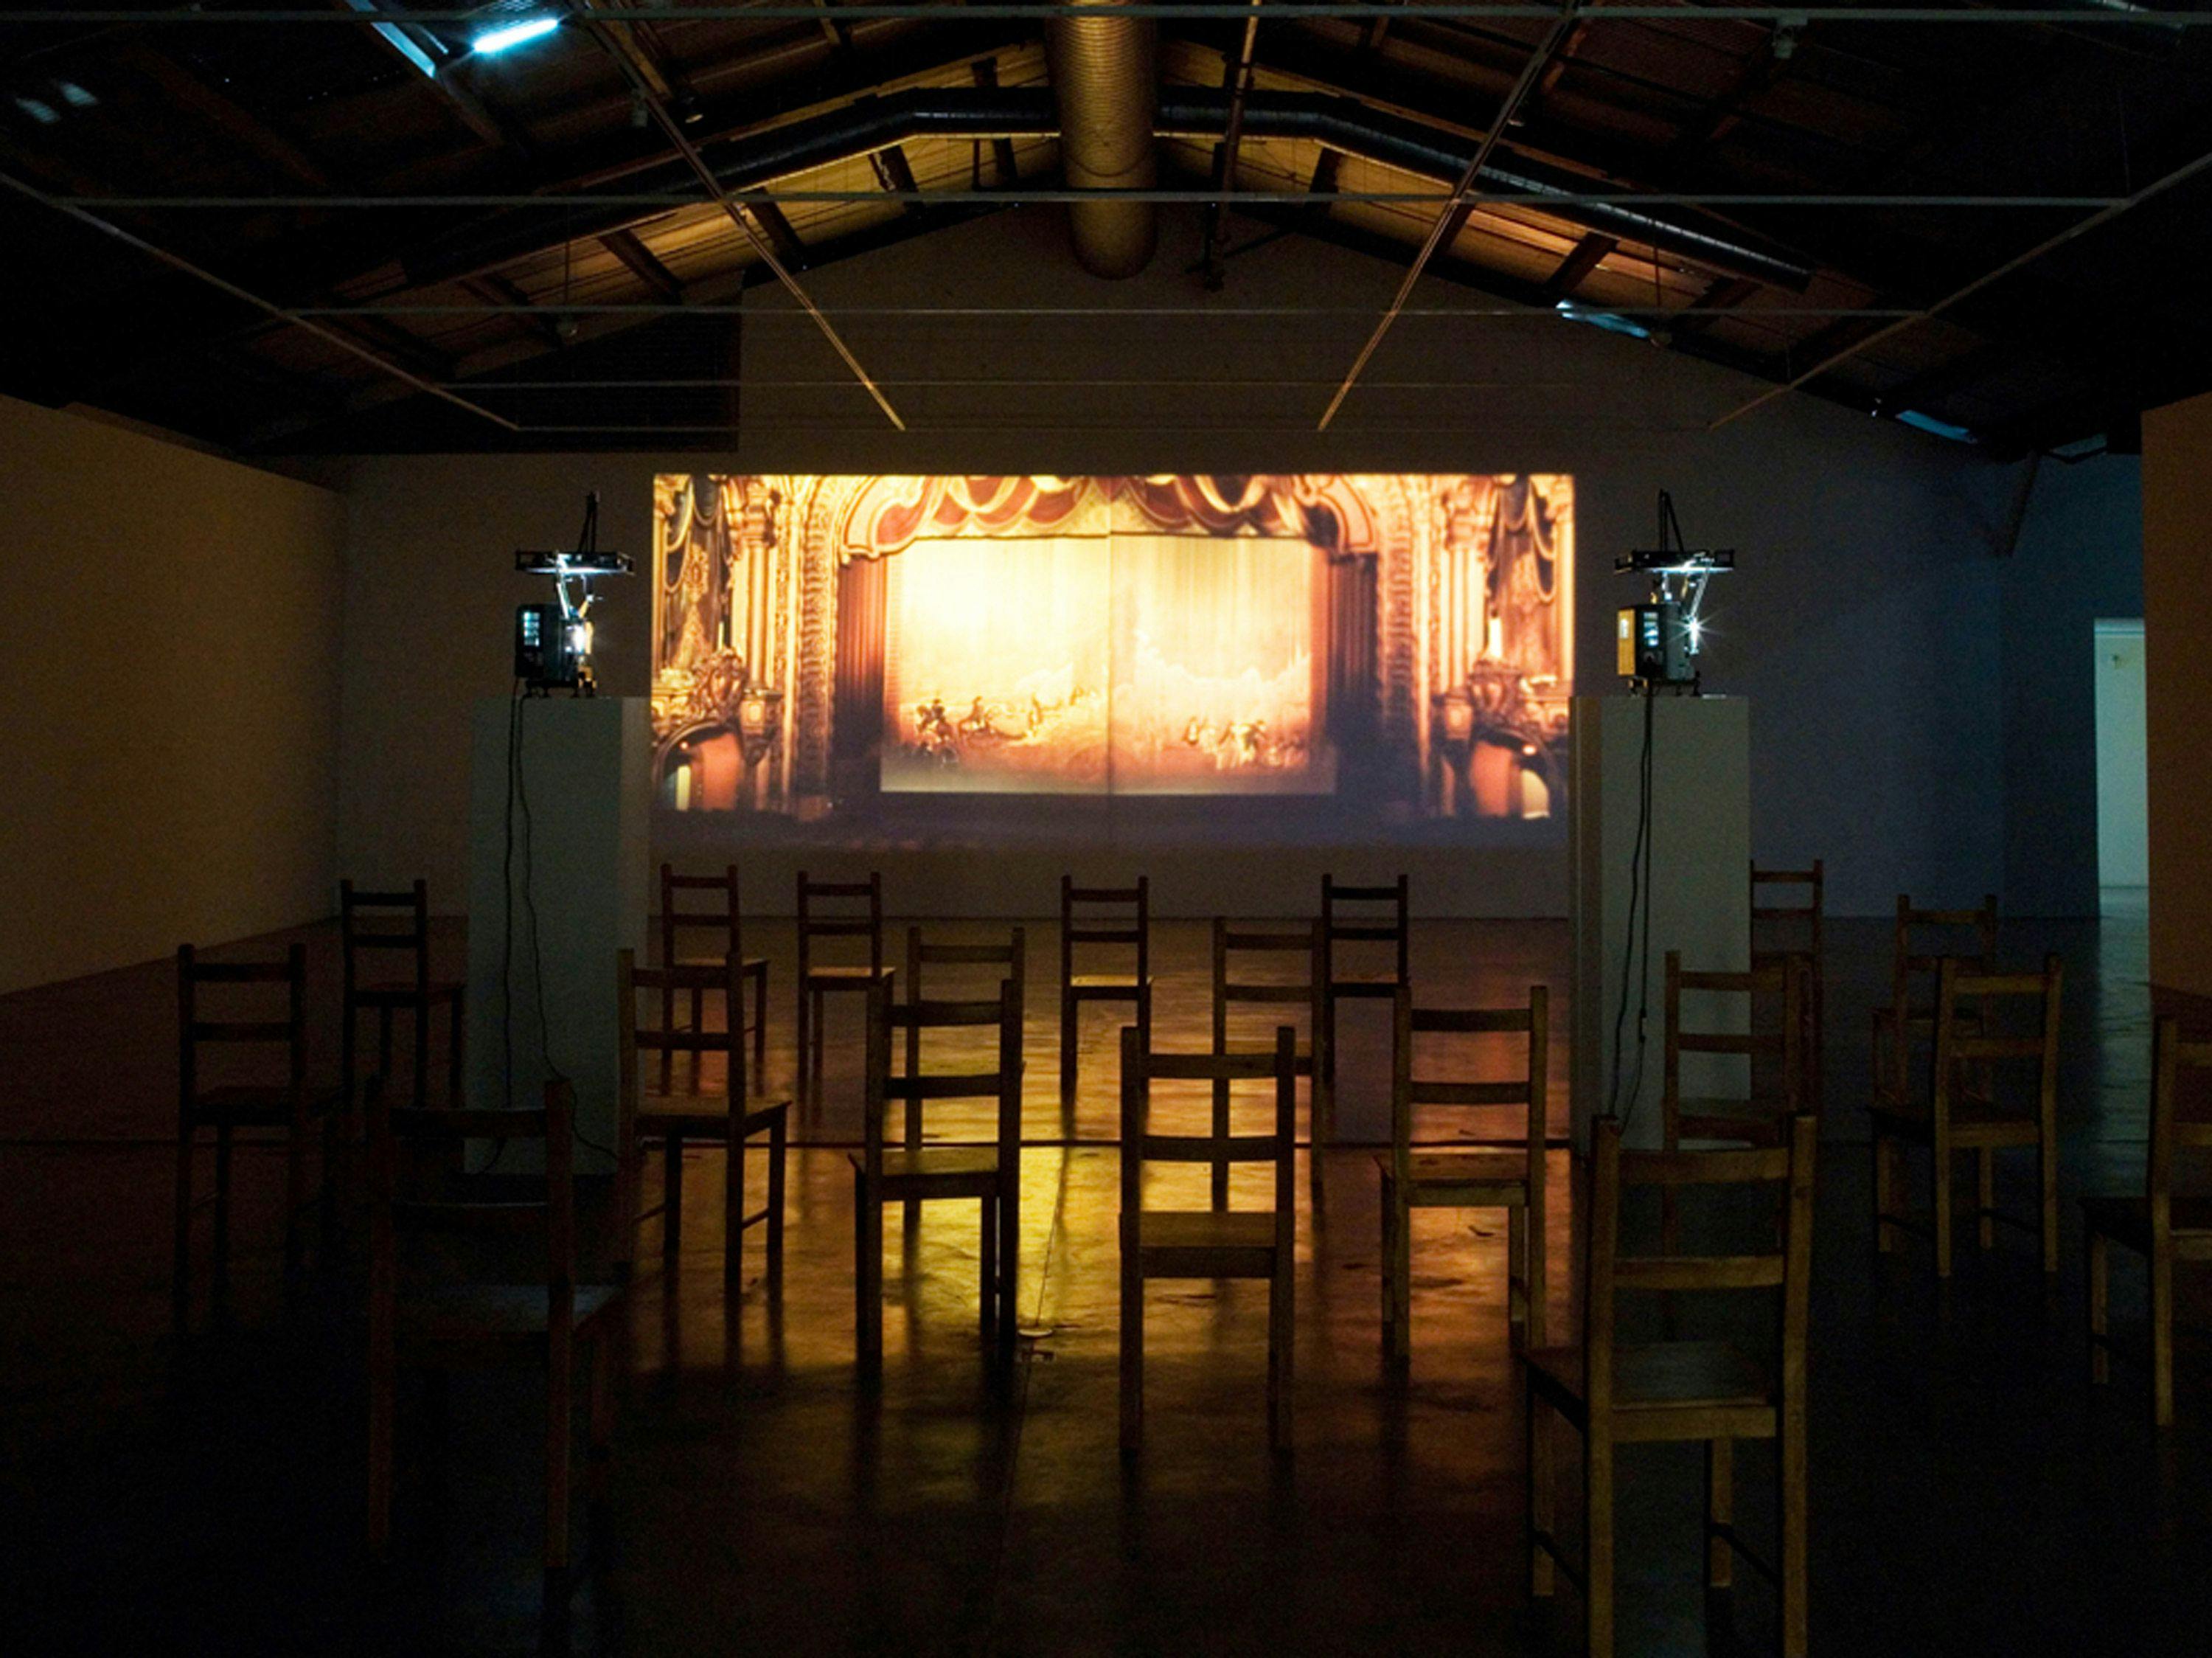 A film by Diana Thater, titled Between Science and Magic, dated 2010.